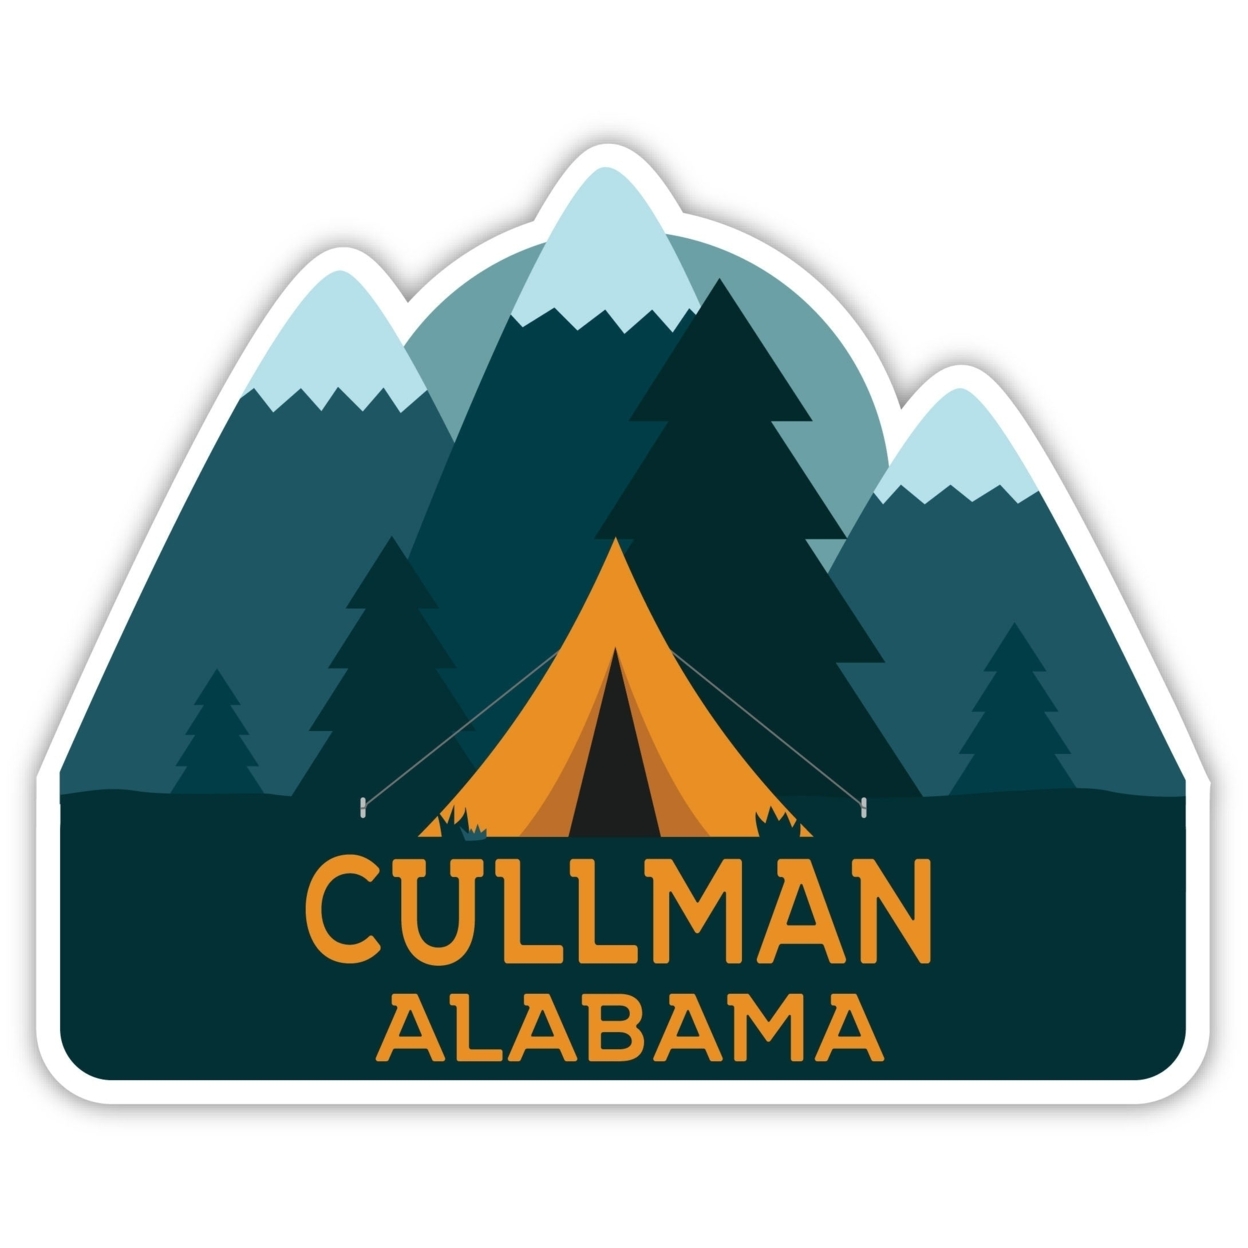 Cullman Alabama Souvenir Decorative Stickers (Choose Theme And Size) - 4-Pack, 4-Inch, Tent